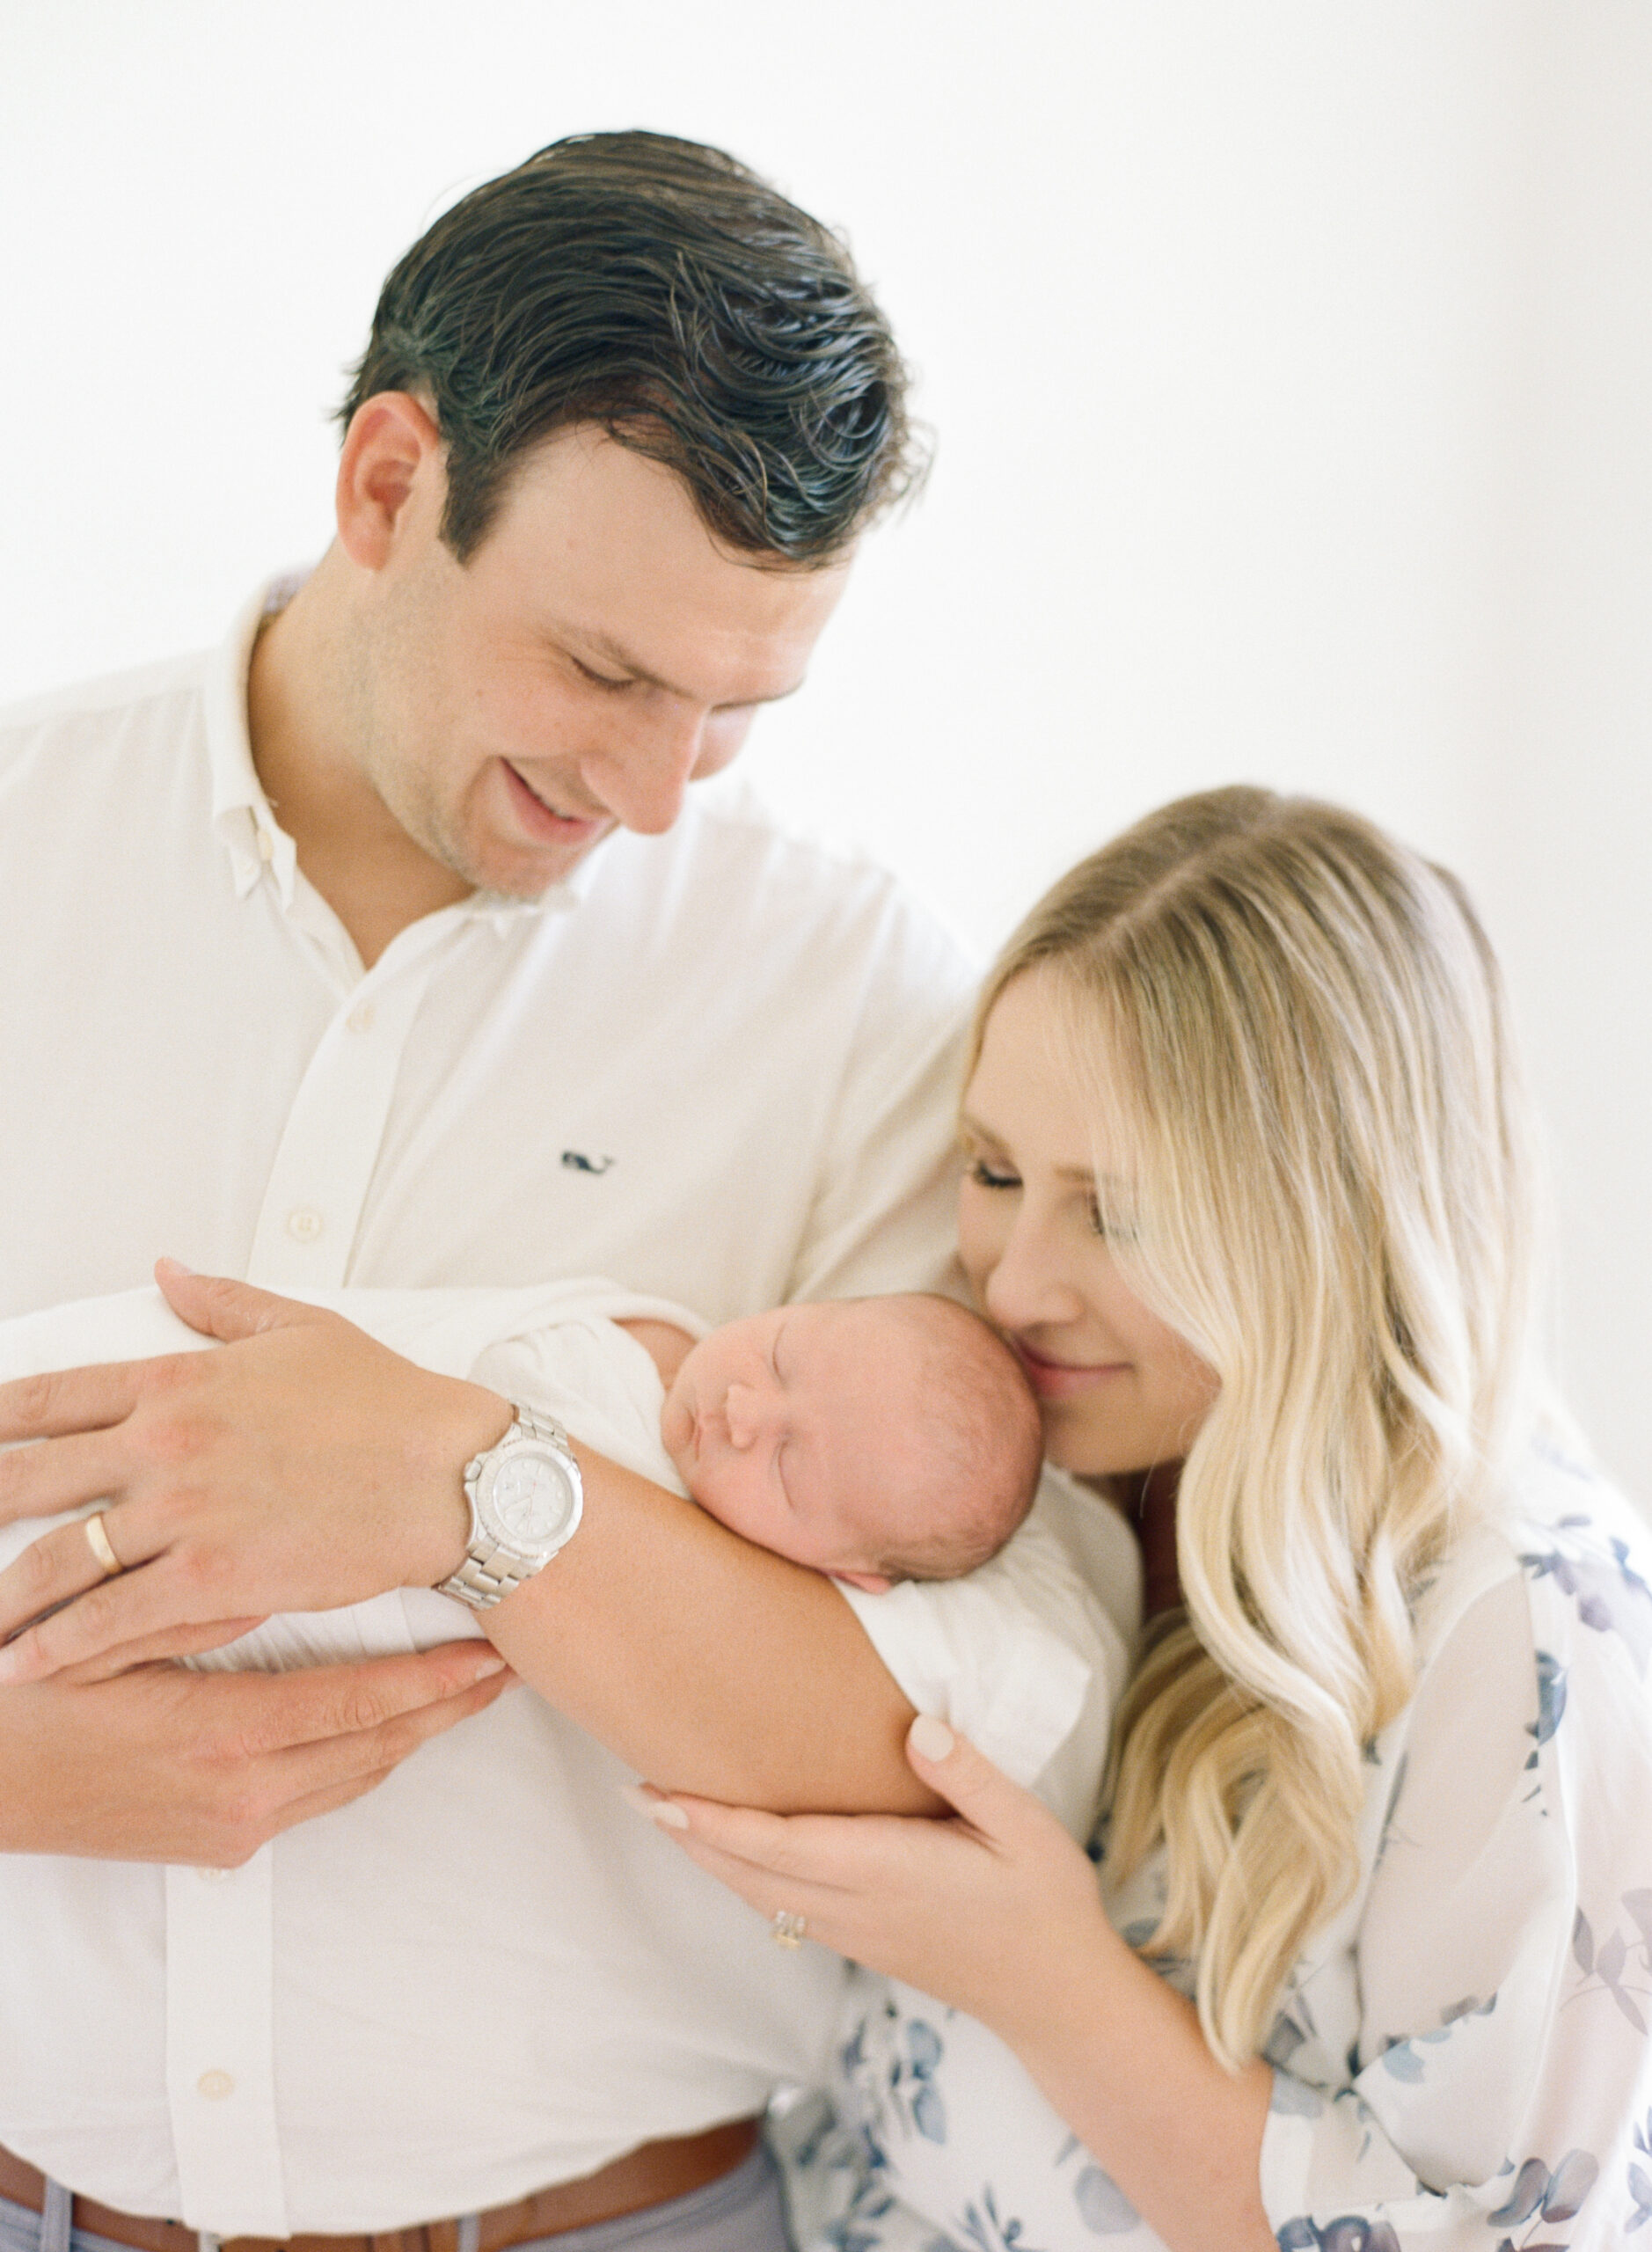 Mom and dad hold their newborn son and look lovingly over him during their Wake Forest newborn photography session. Photographed by Raleigh newborn photographer A.J. Dunlap Photography.